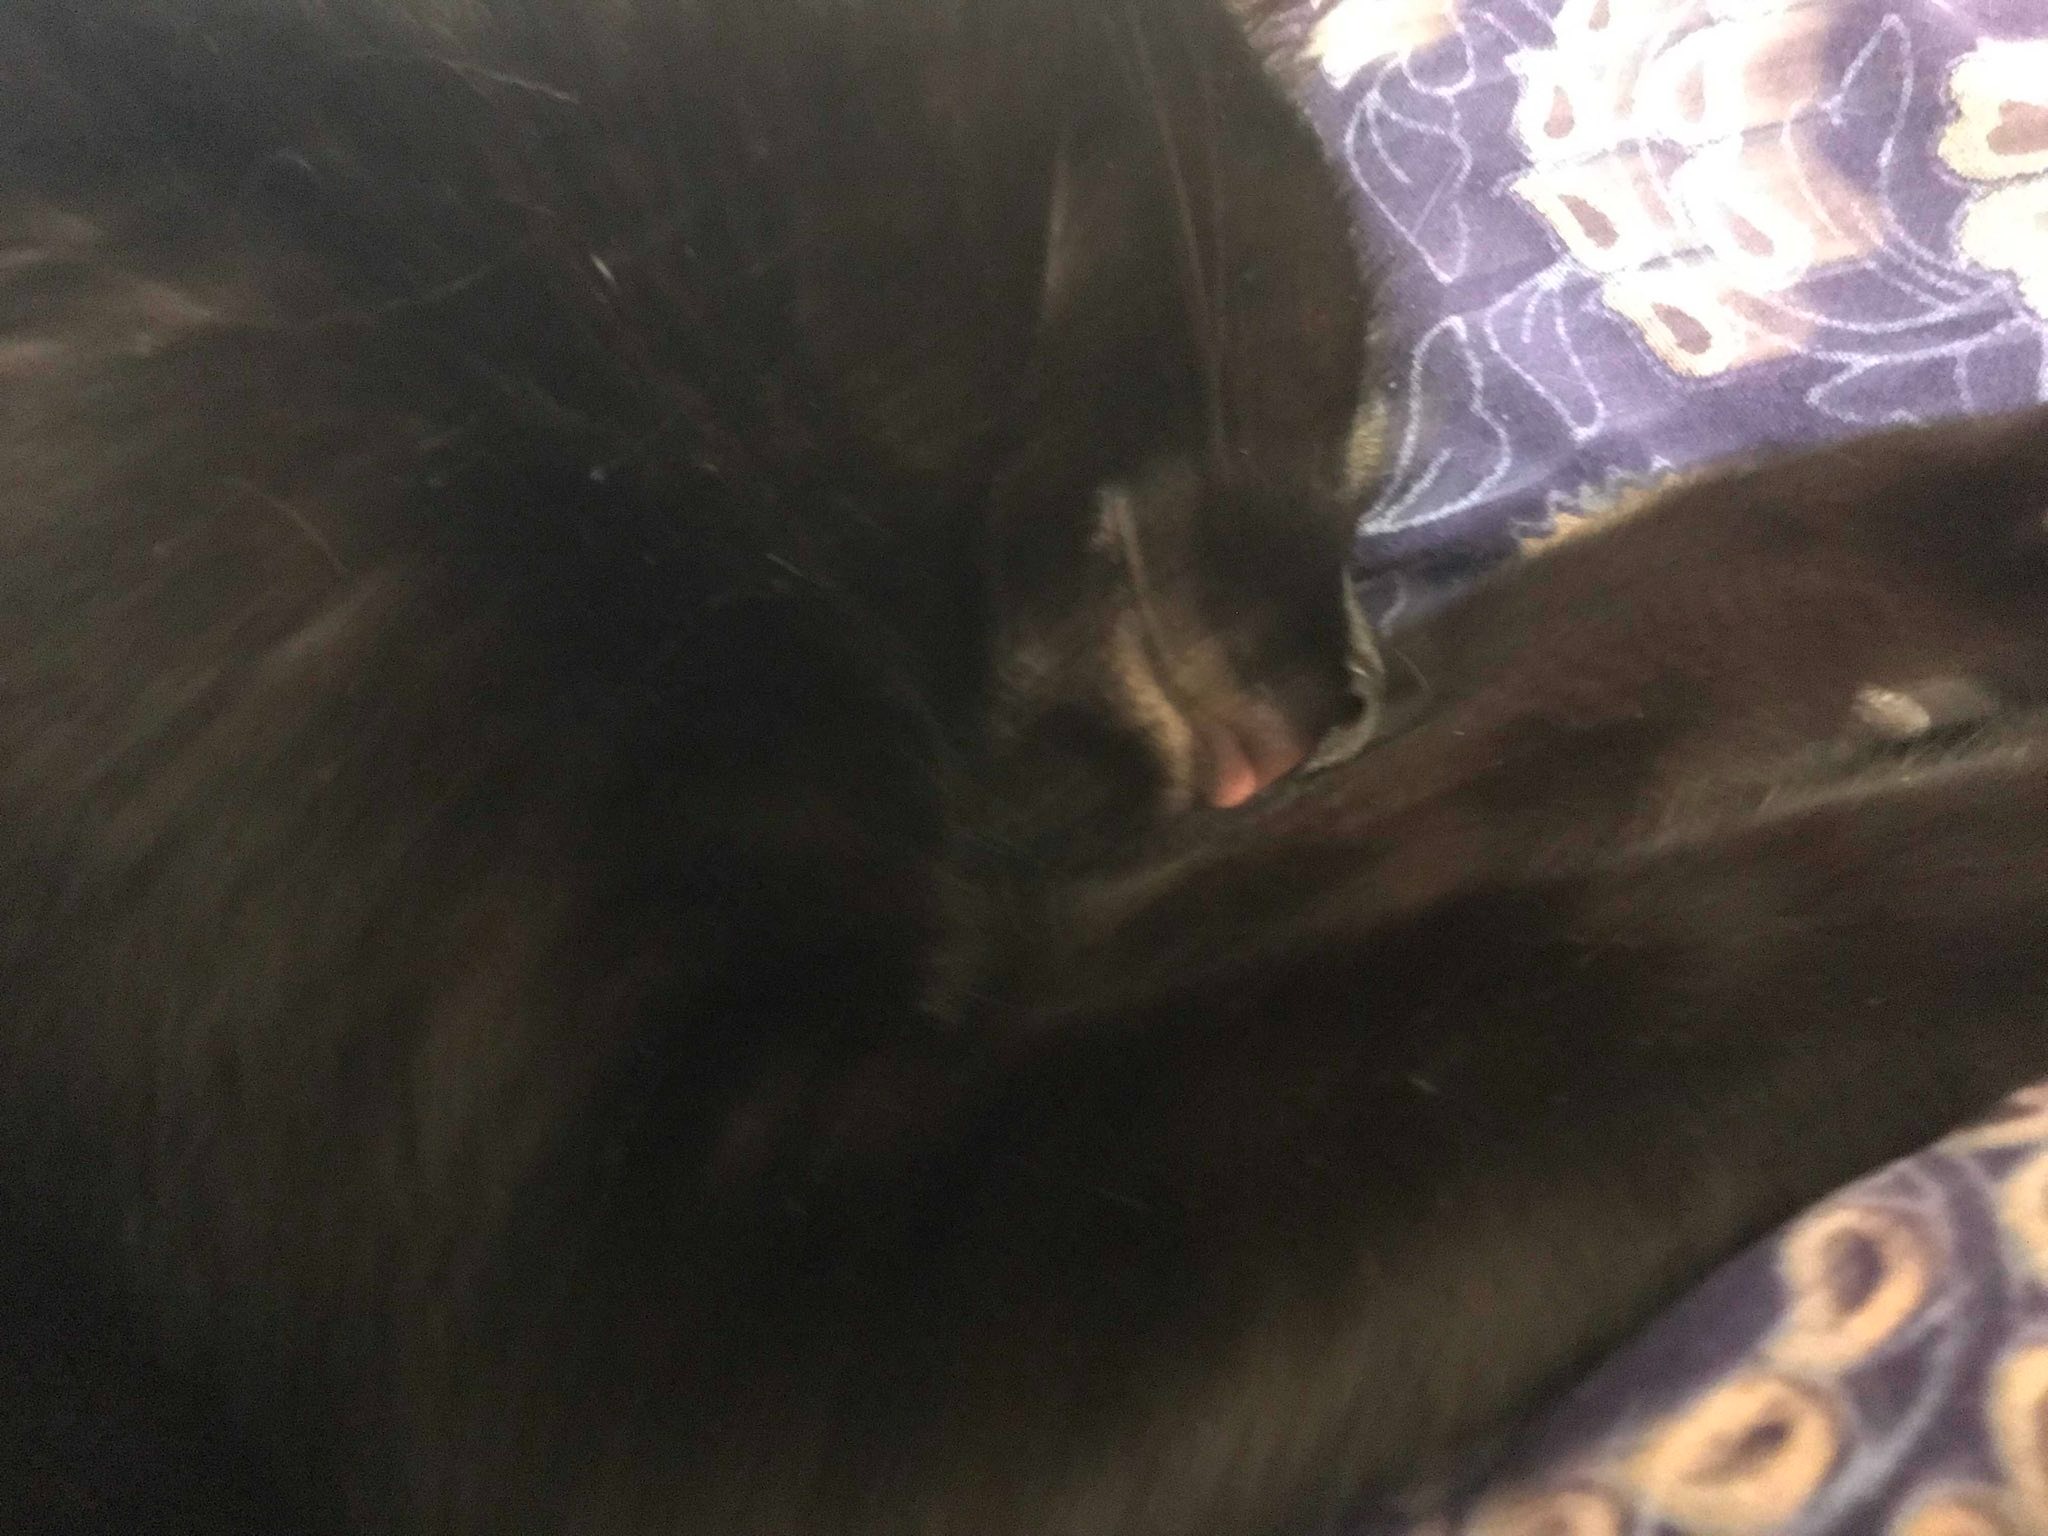 PHoto of a black cat taken from above. It's a close up. He's sleeping on his side, and his mouth is open slightly to reveal his tongue.